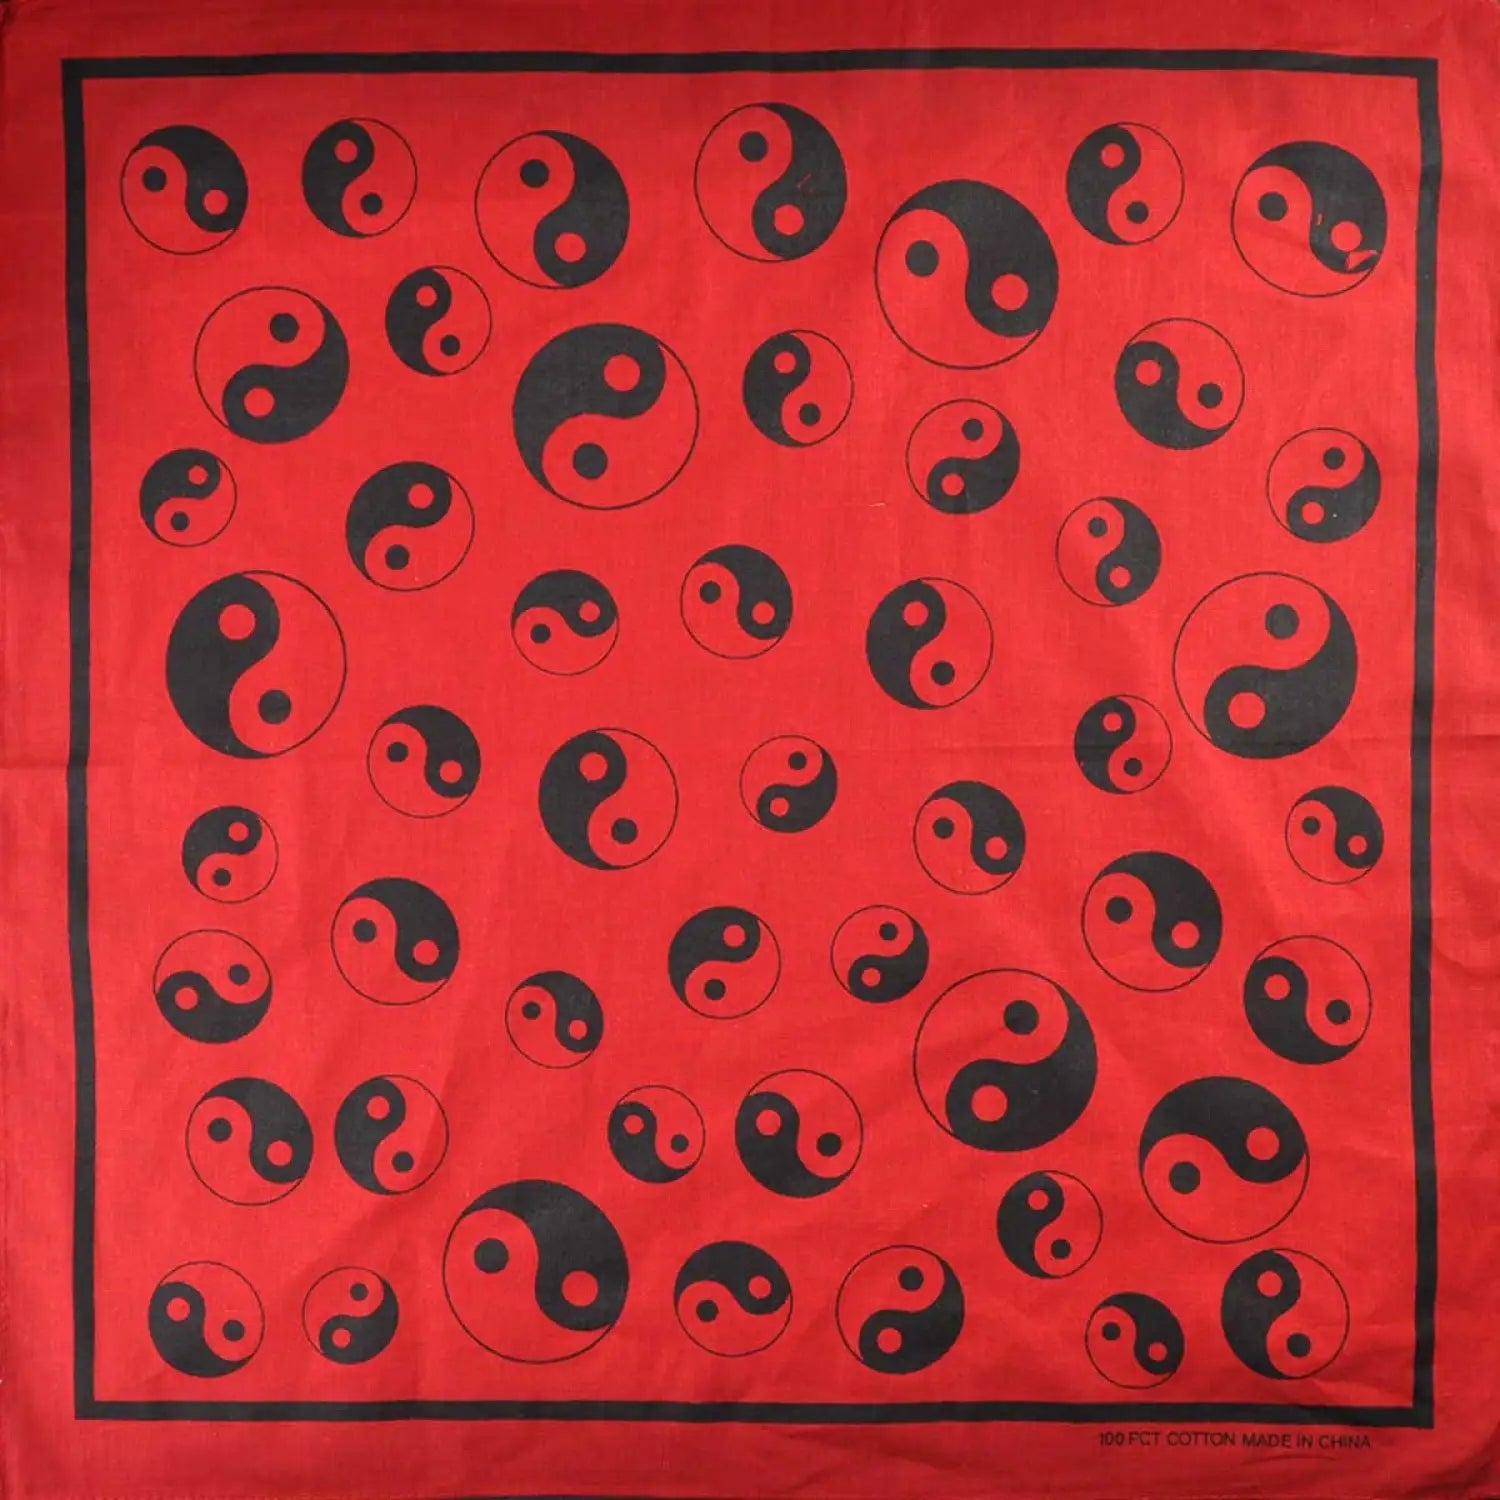 Red scarf with black and white circles on Ying Yang Print Square bandana